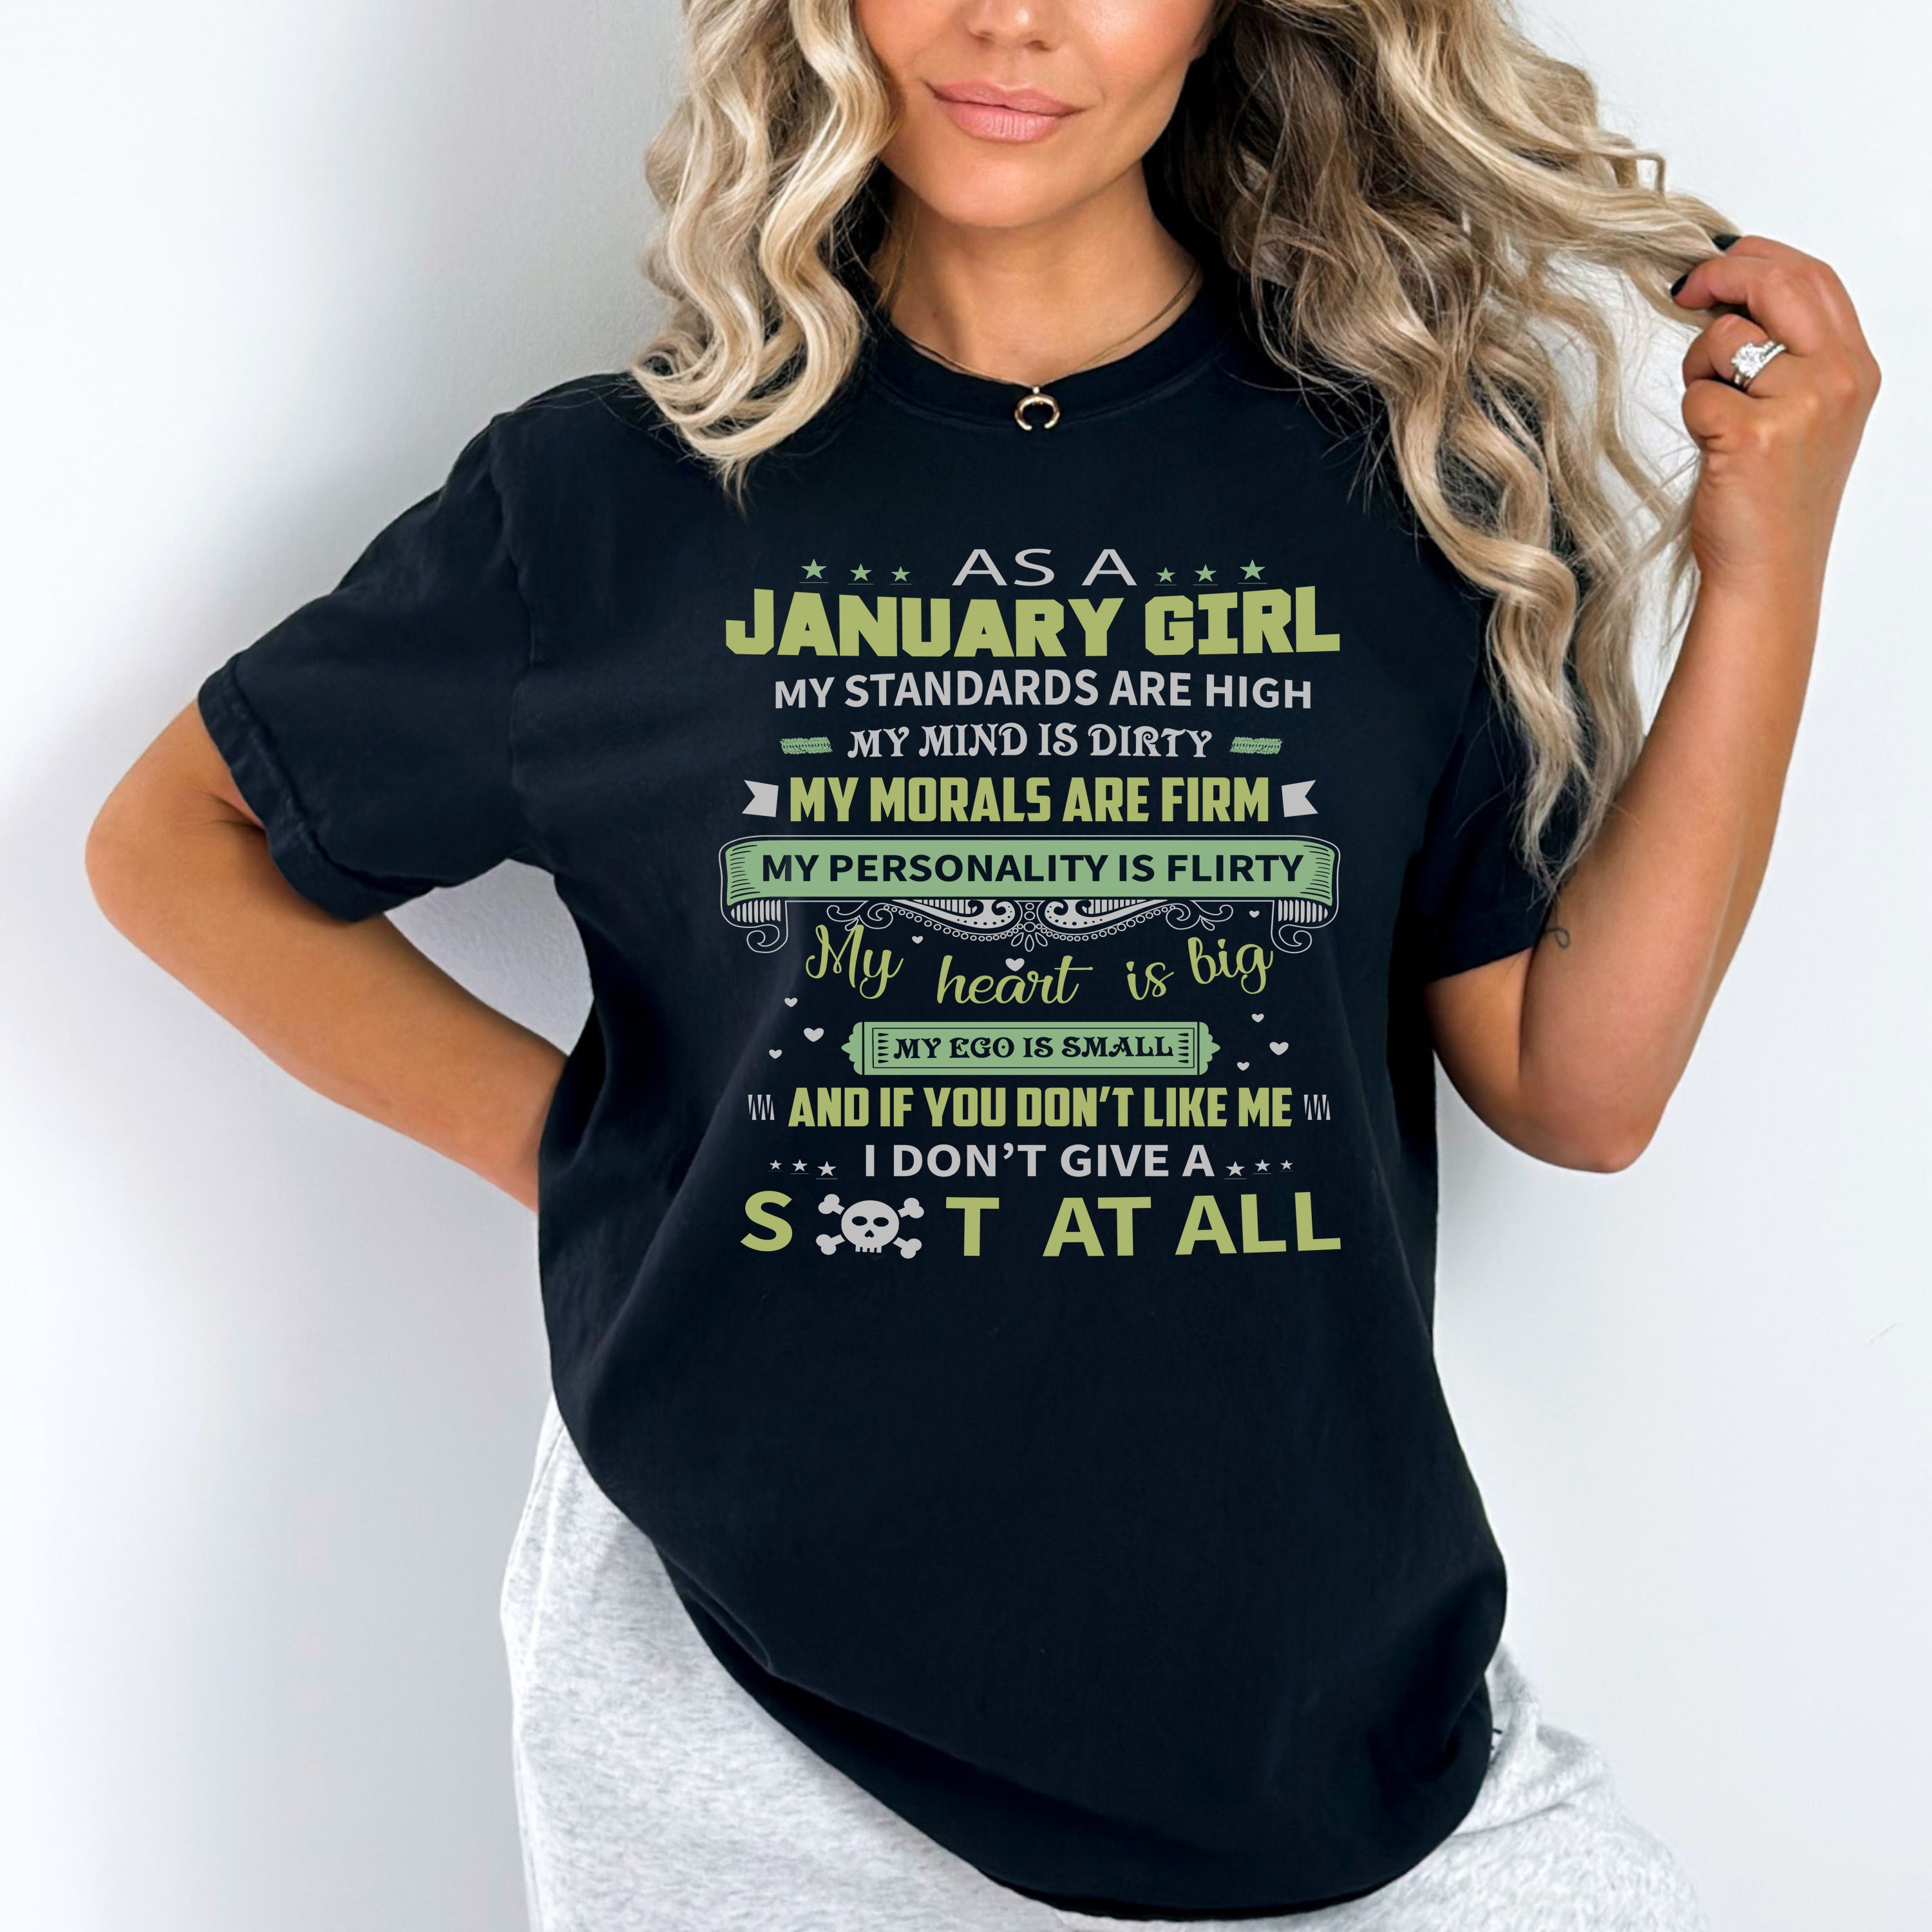 "As A January Girl My Standards Are High"